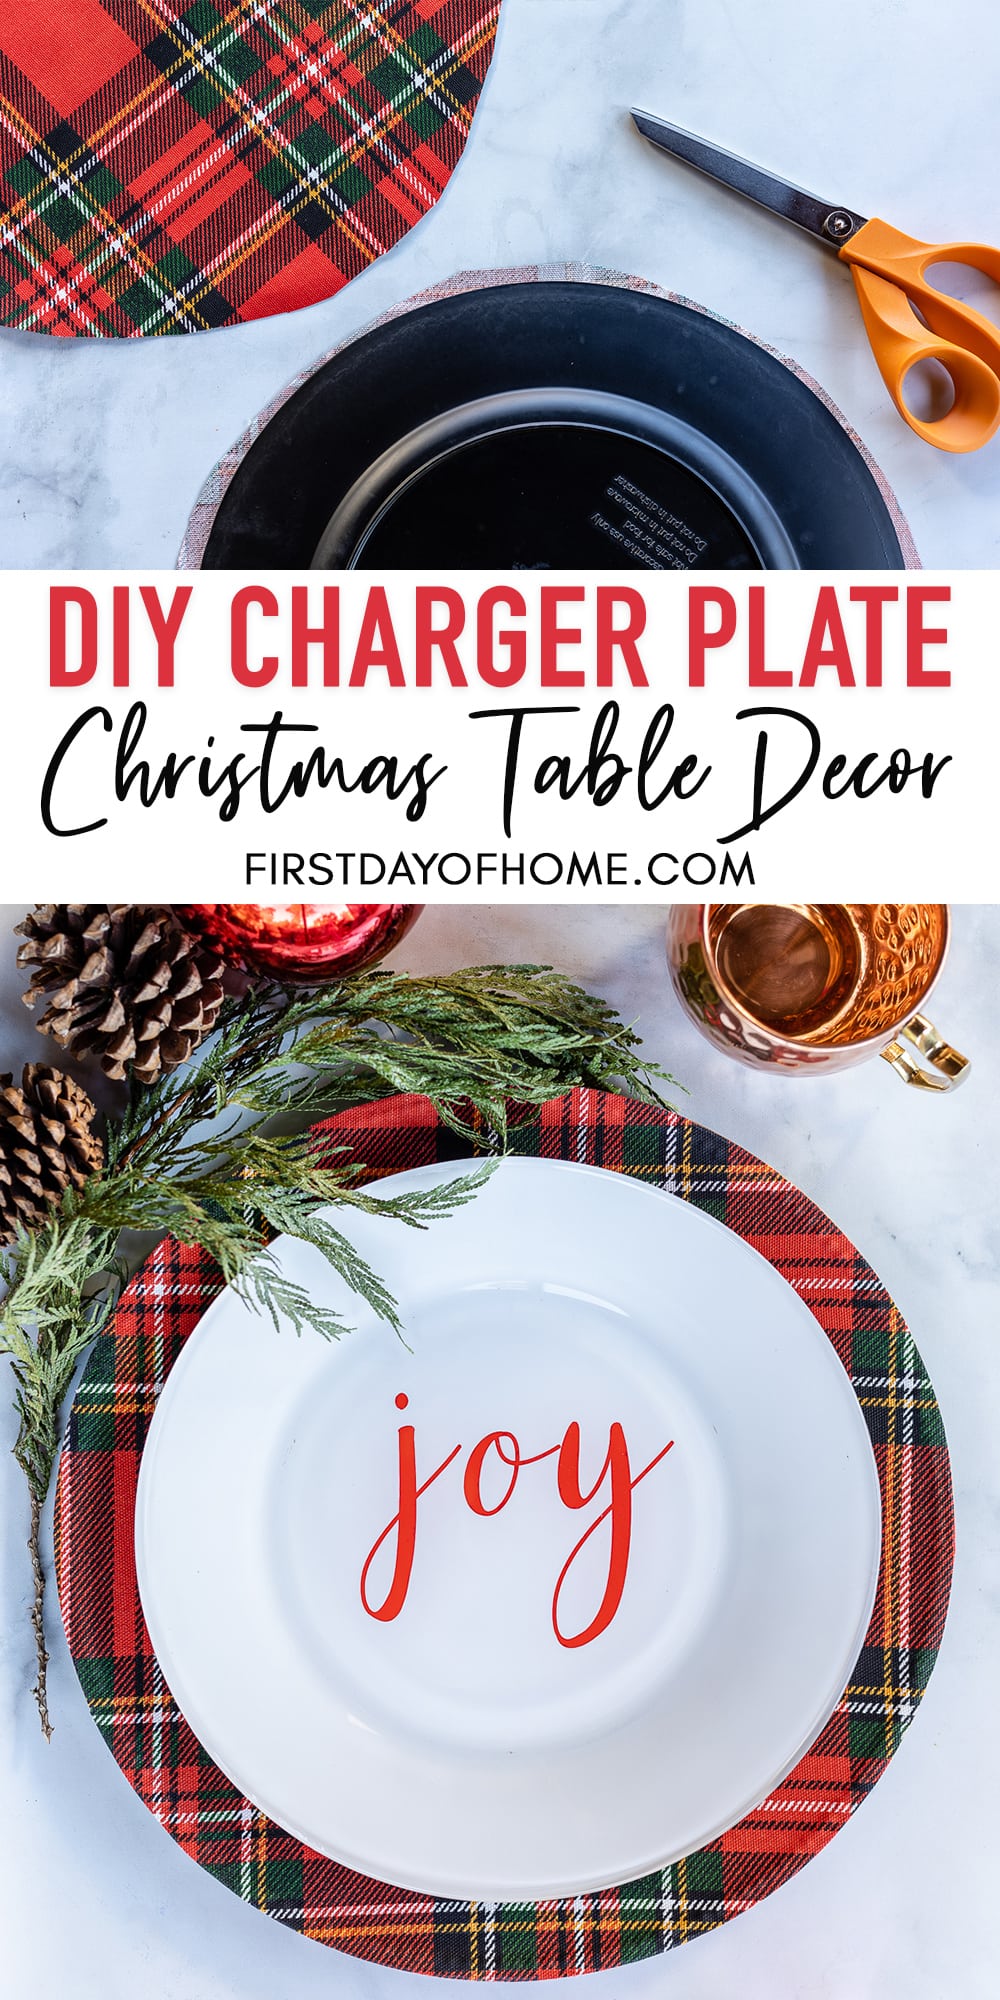 Pin reading "DIY Charger Plate, Christmas Table Decor" with images of a tartan plaid charger plate with a white Joy plate on top